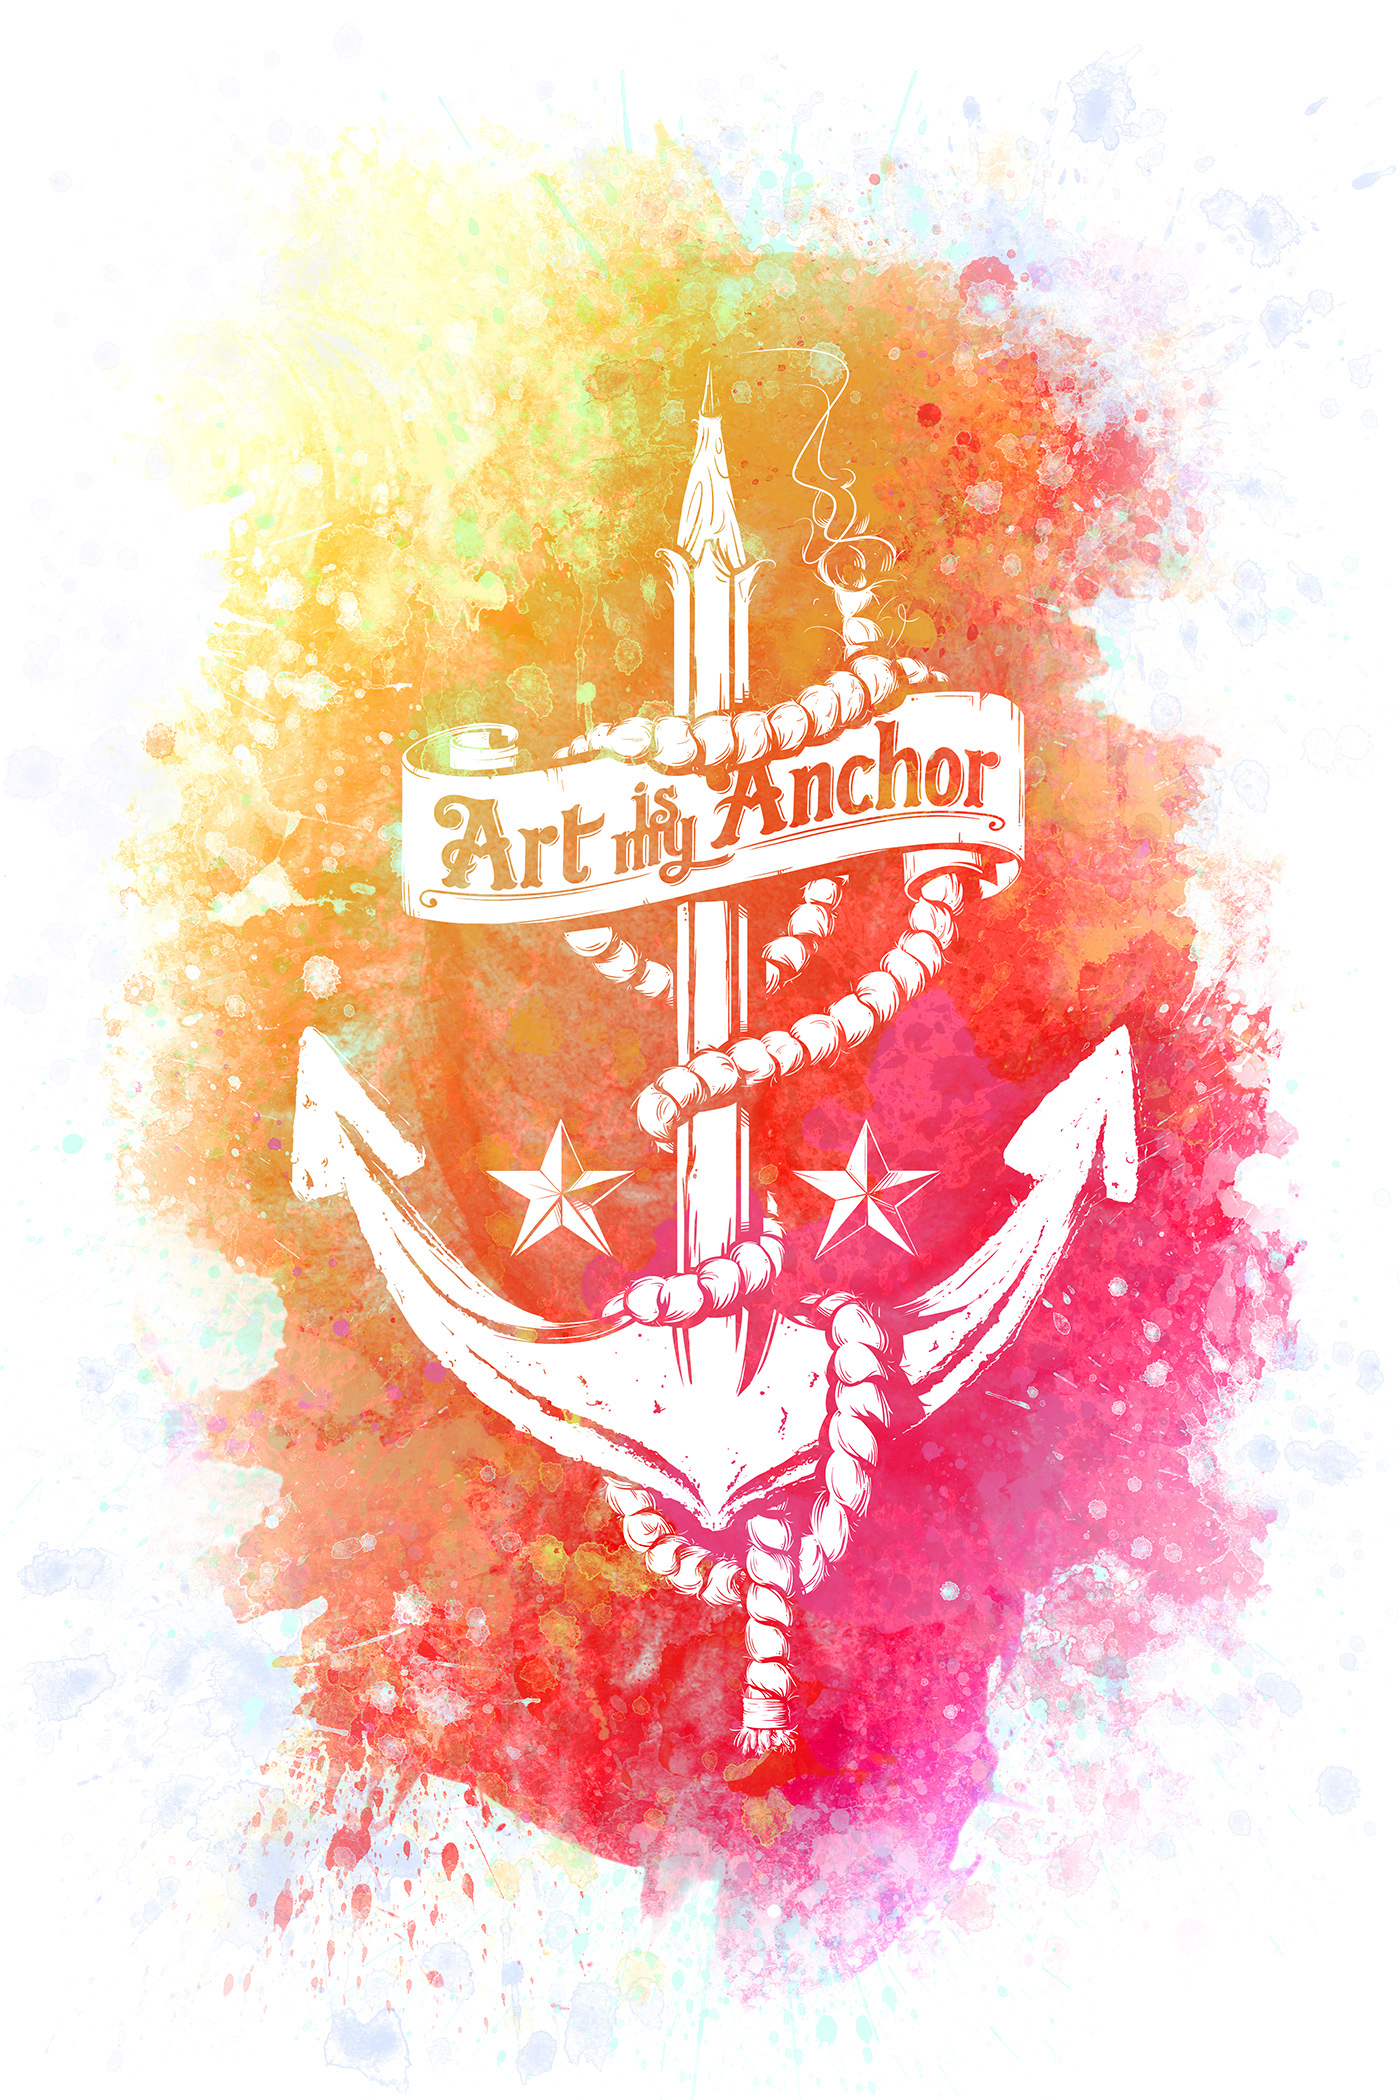 anchor art vintage neo trad american traditional sailor jerry inspiration graphic tee tshirt motivational